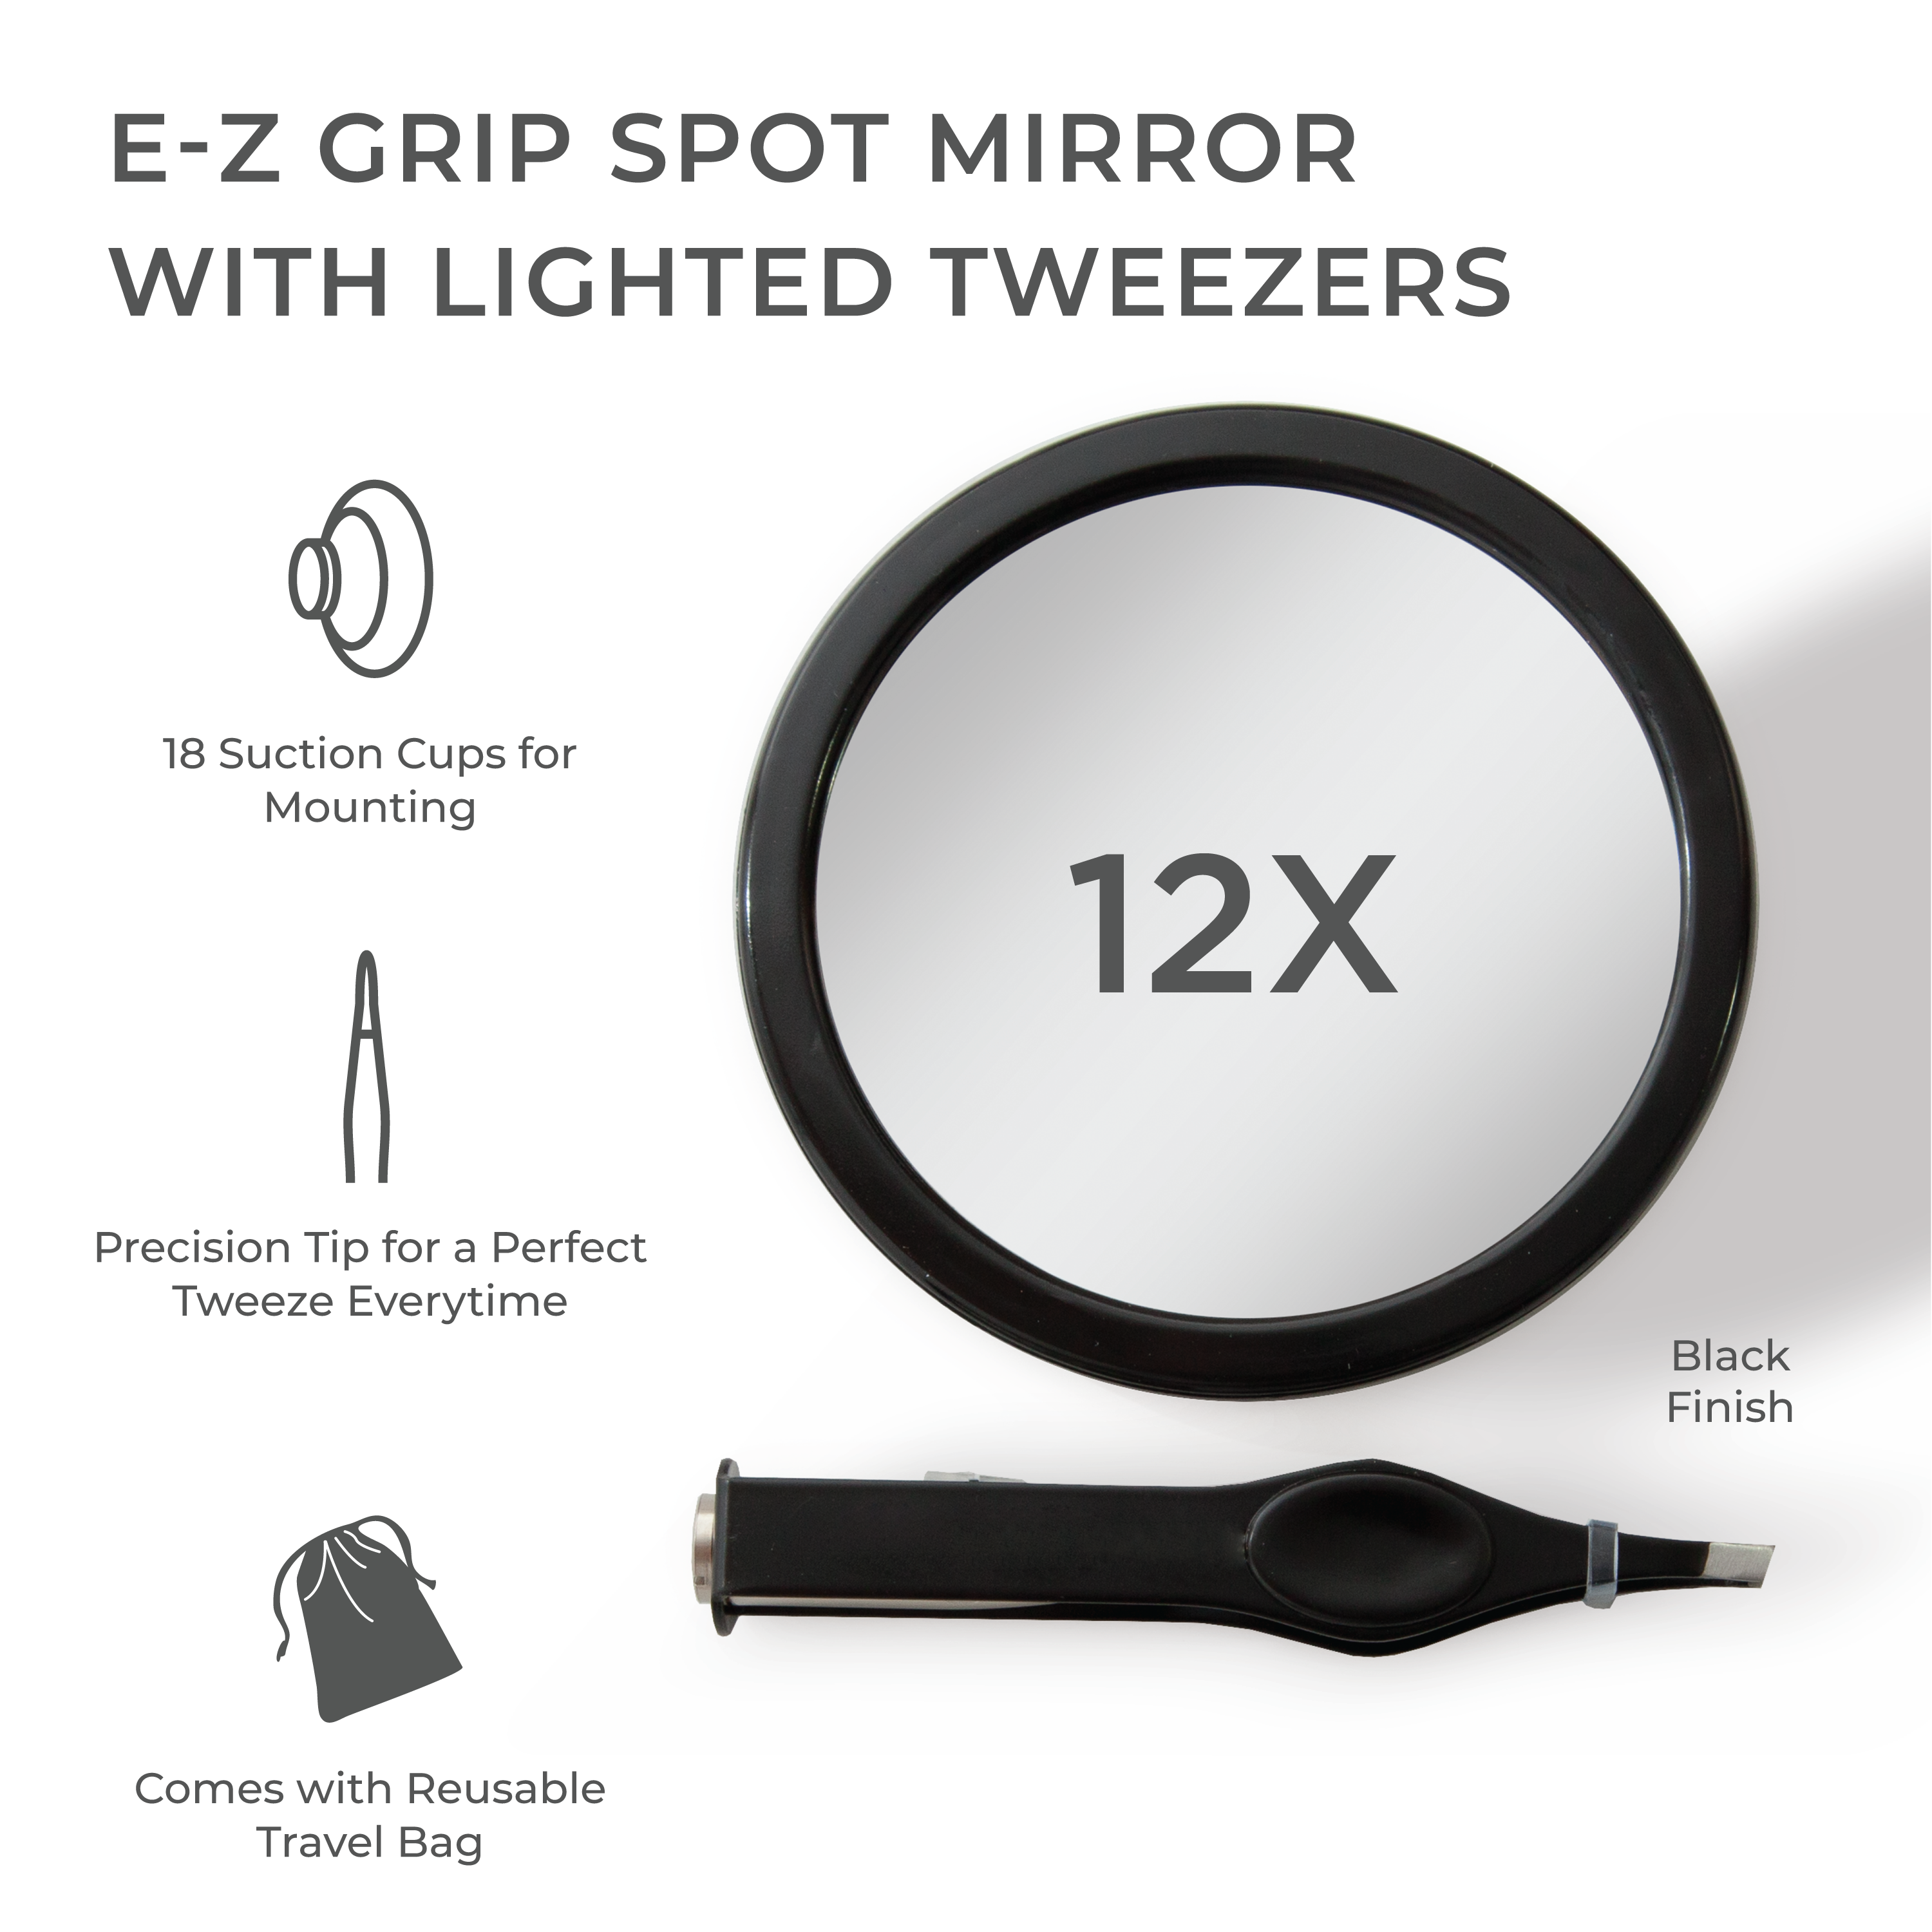 Compact Mirror with Magnification & Lighted Tweezers